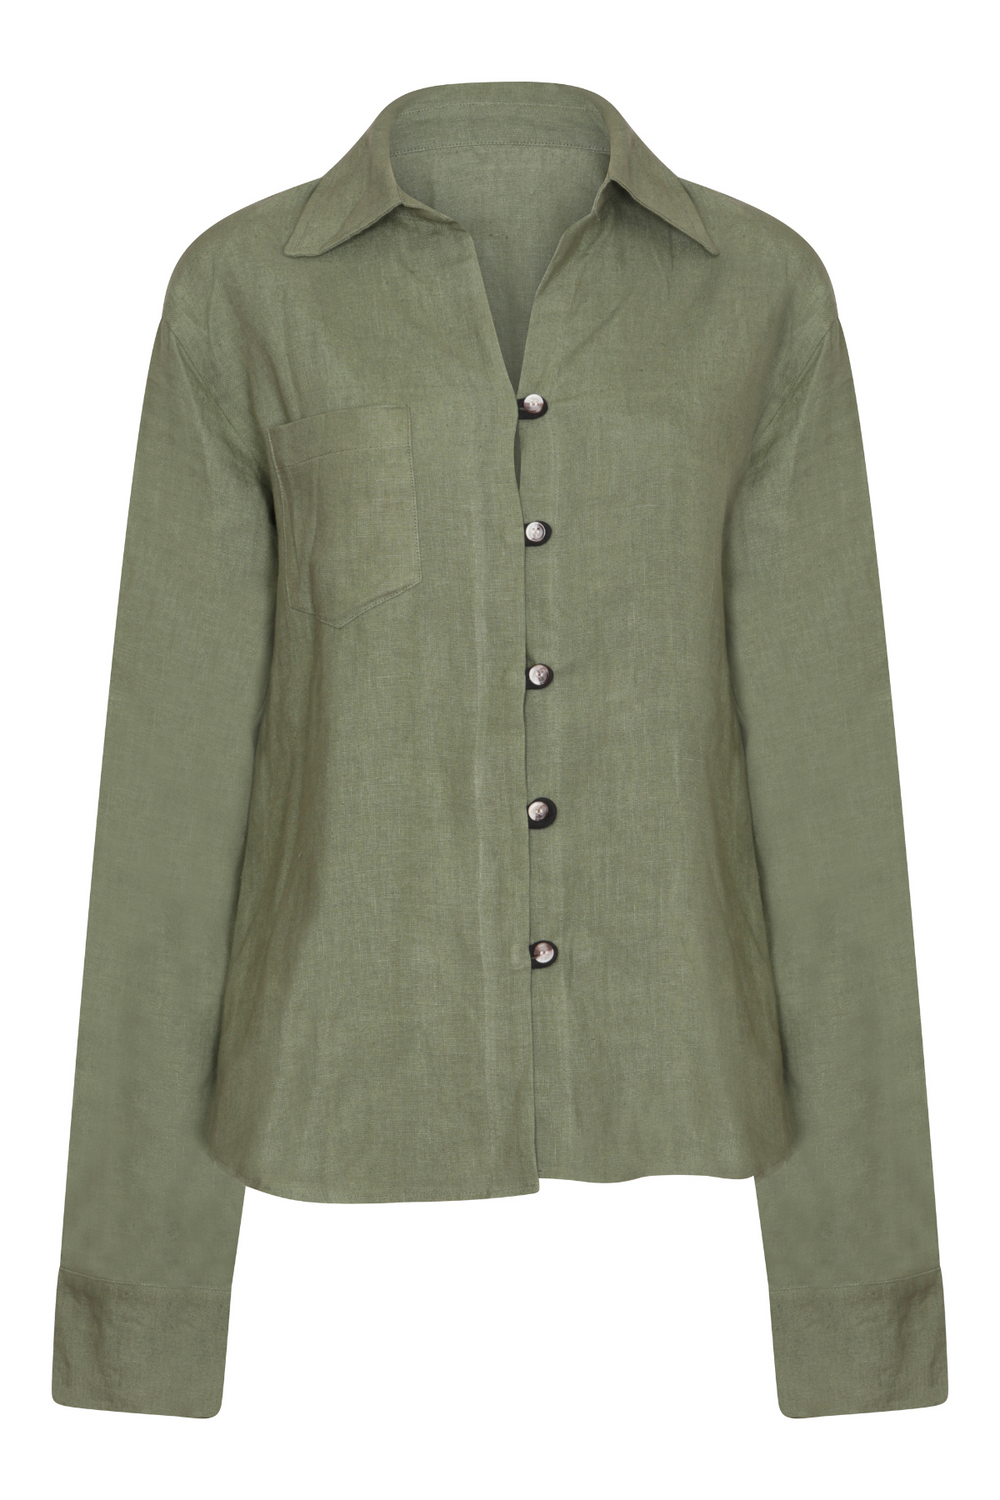 Pure linen green shirt with black button detailing 